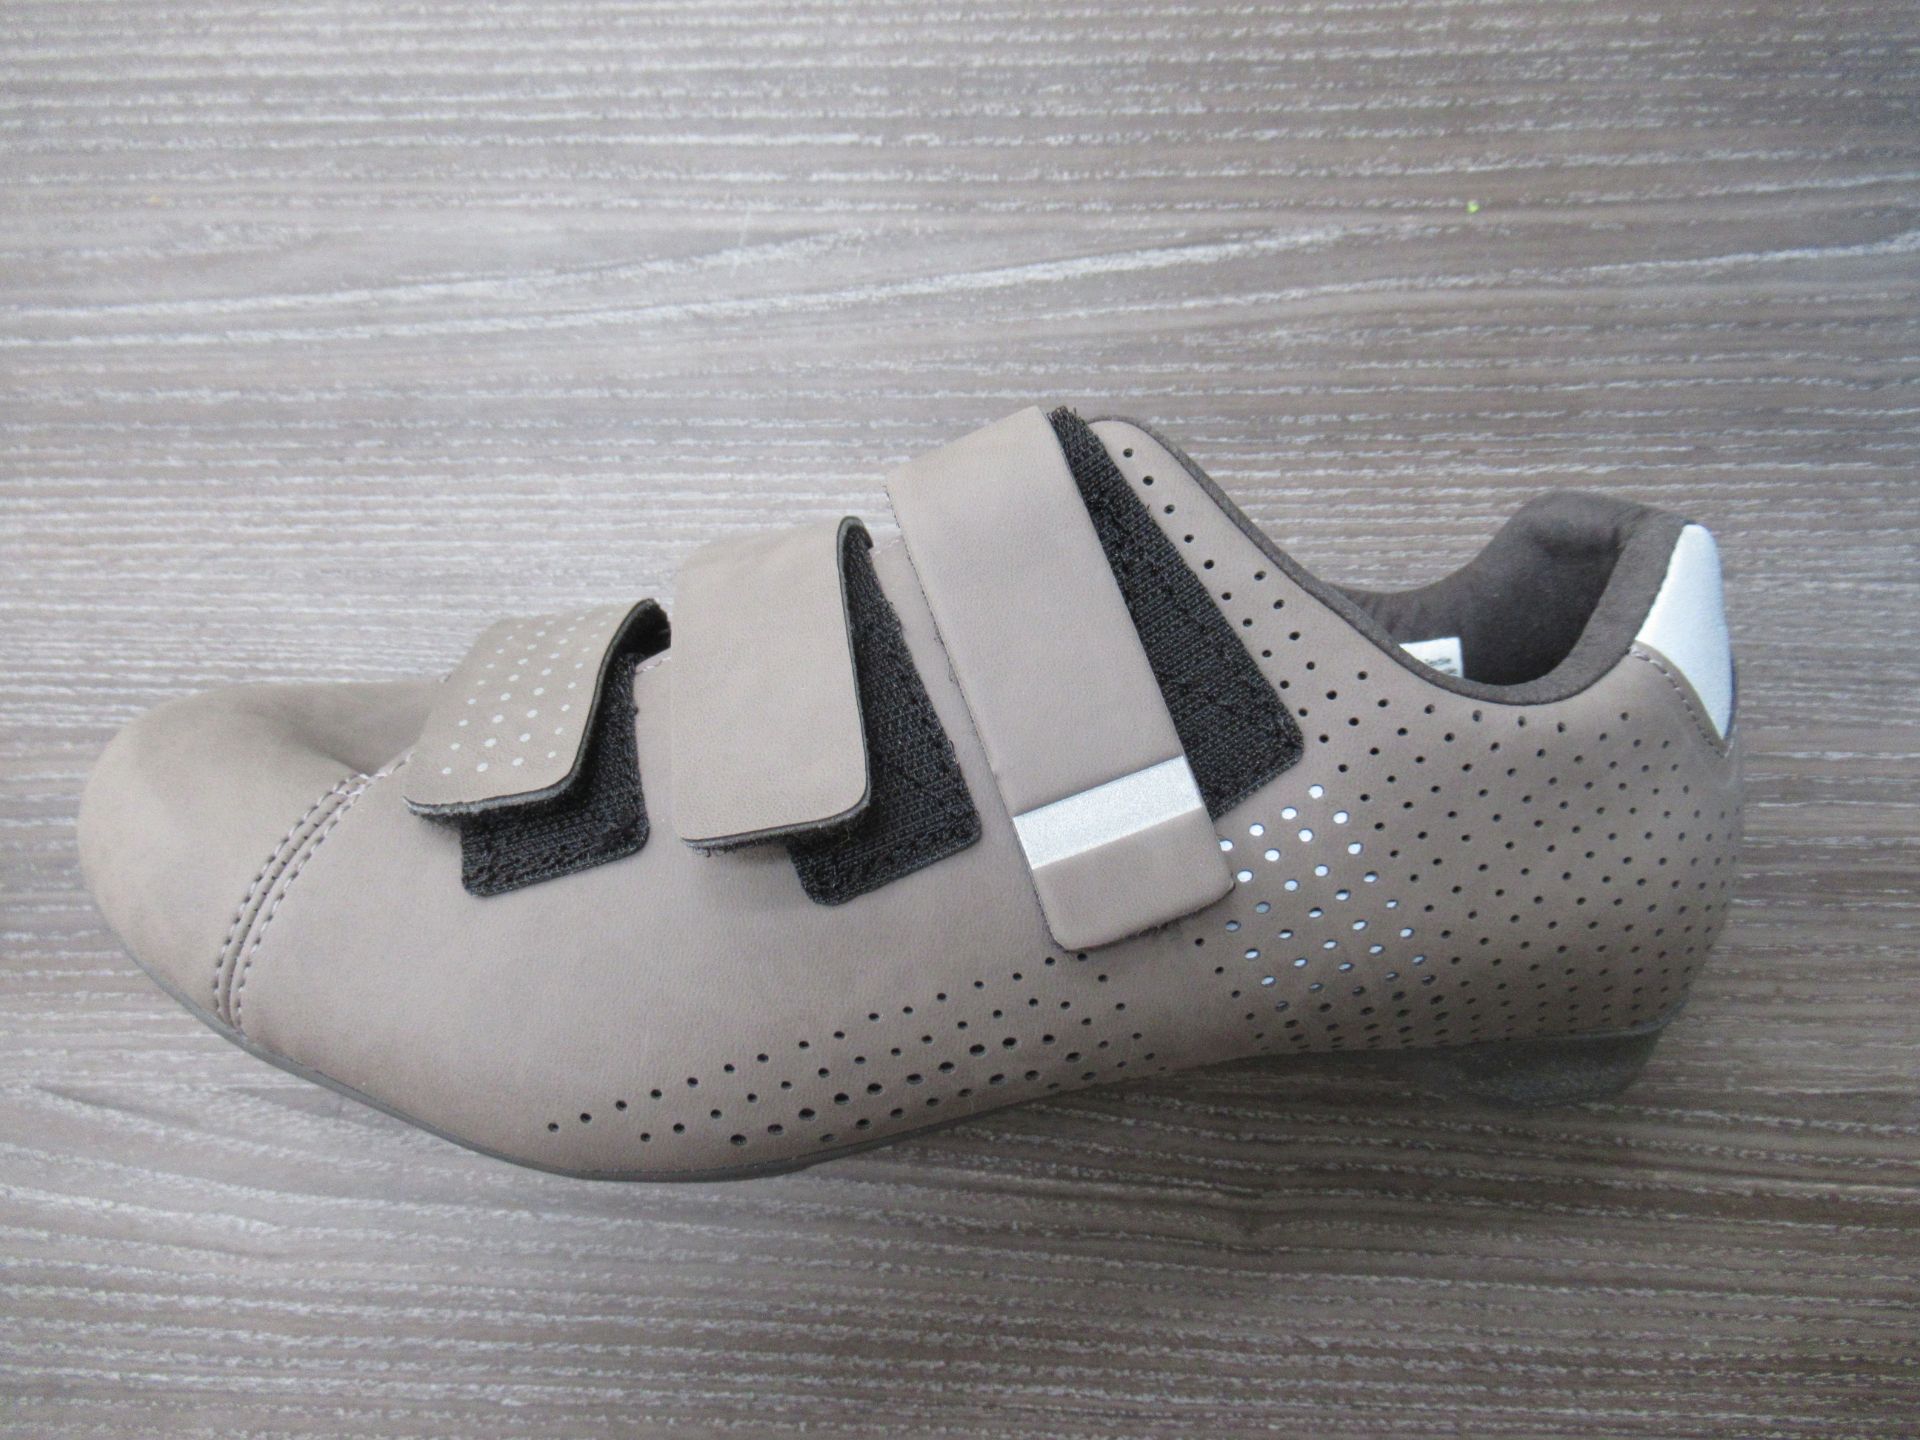 Pair of Shimano RT-5 ladies cycling shoes (brown) - boxed EU size 39 (RRP£89.99)